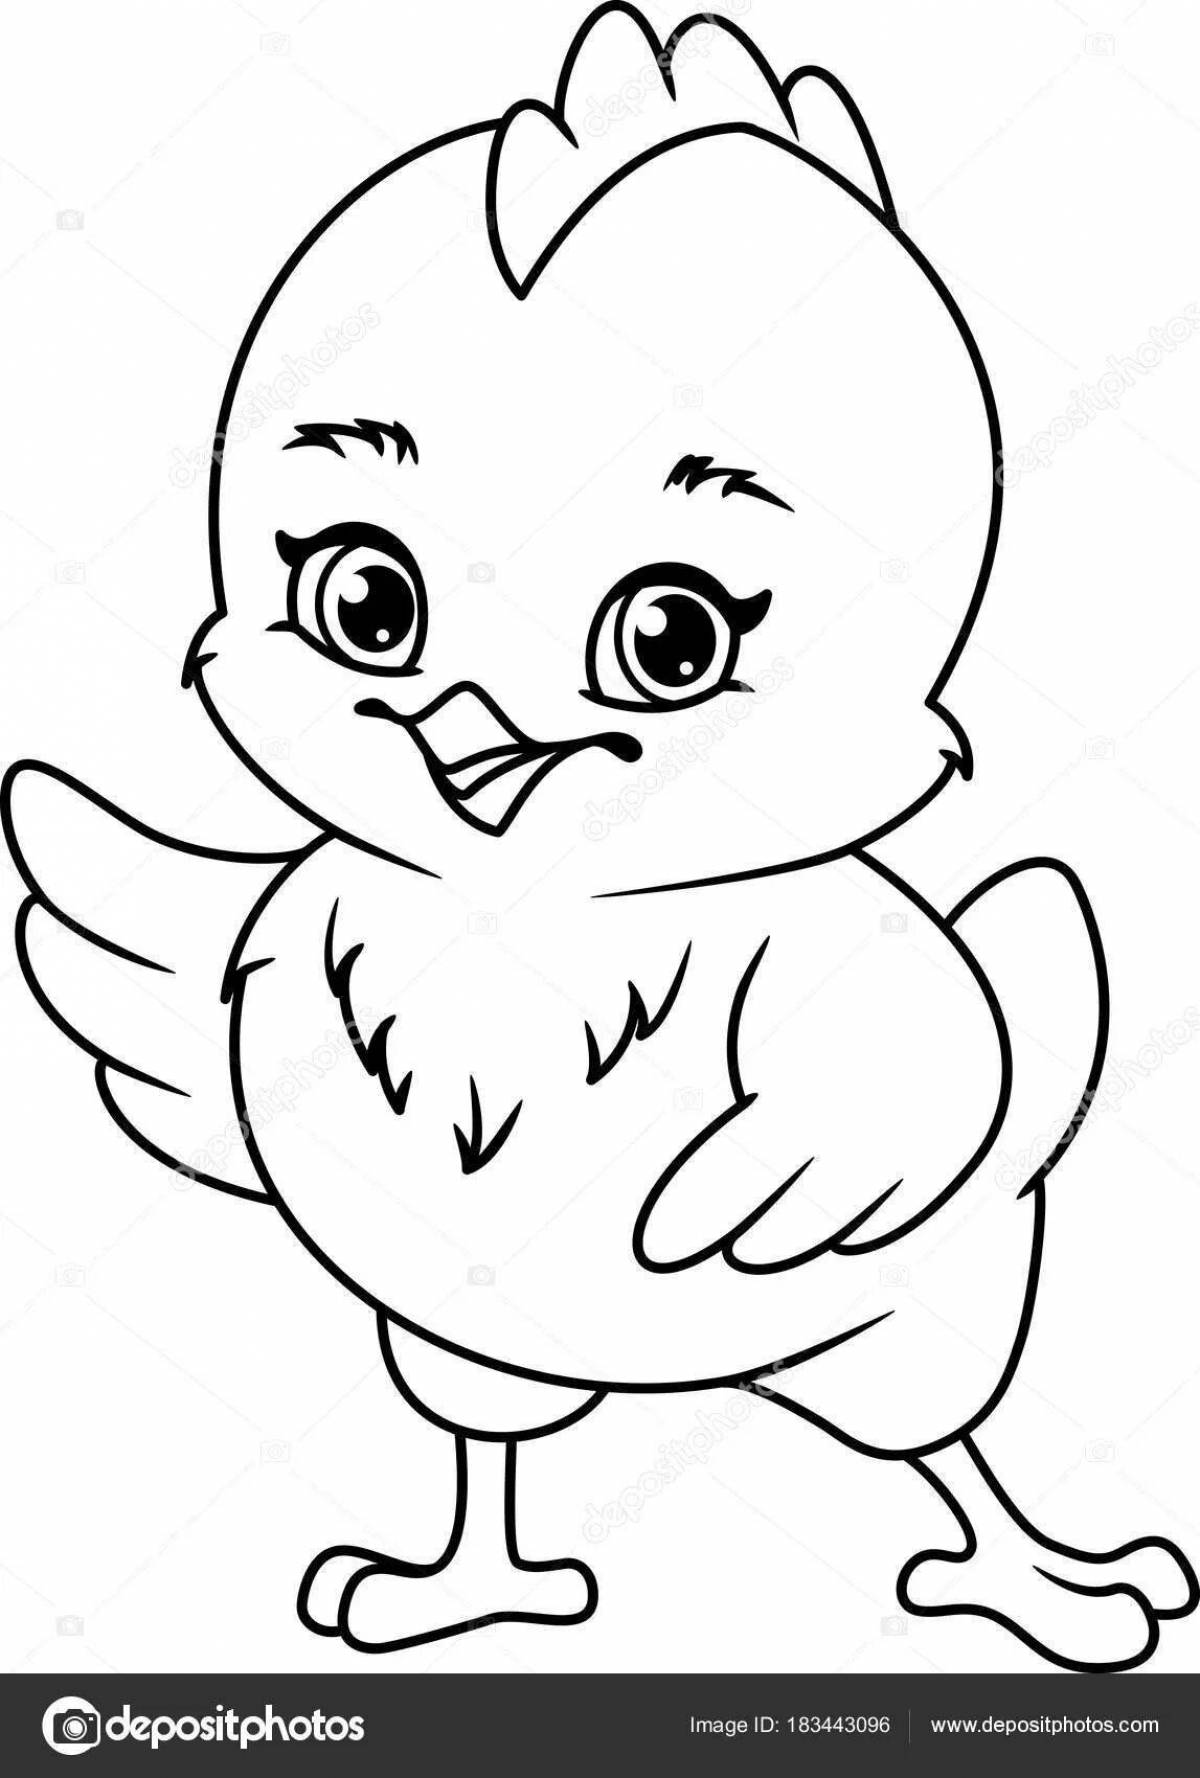 Fun coloring pages with chickens for kids 6-7 years old